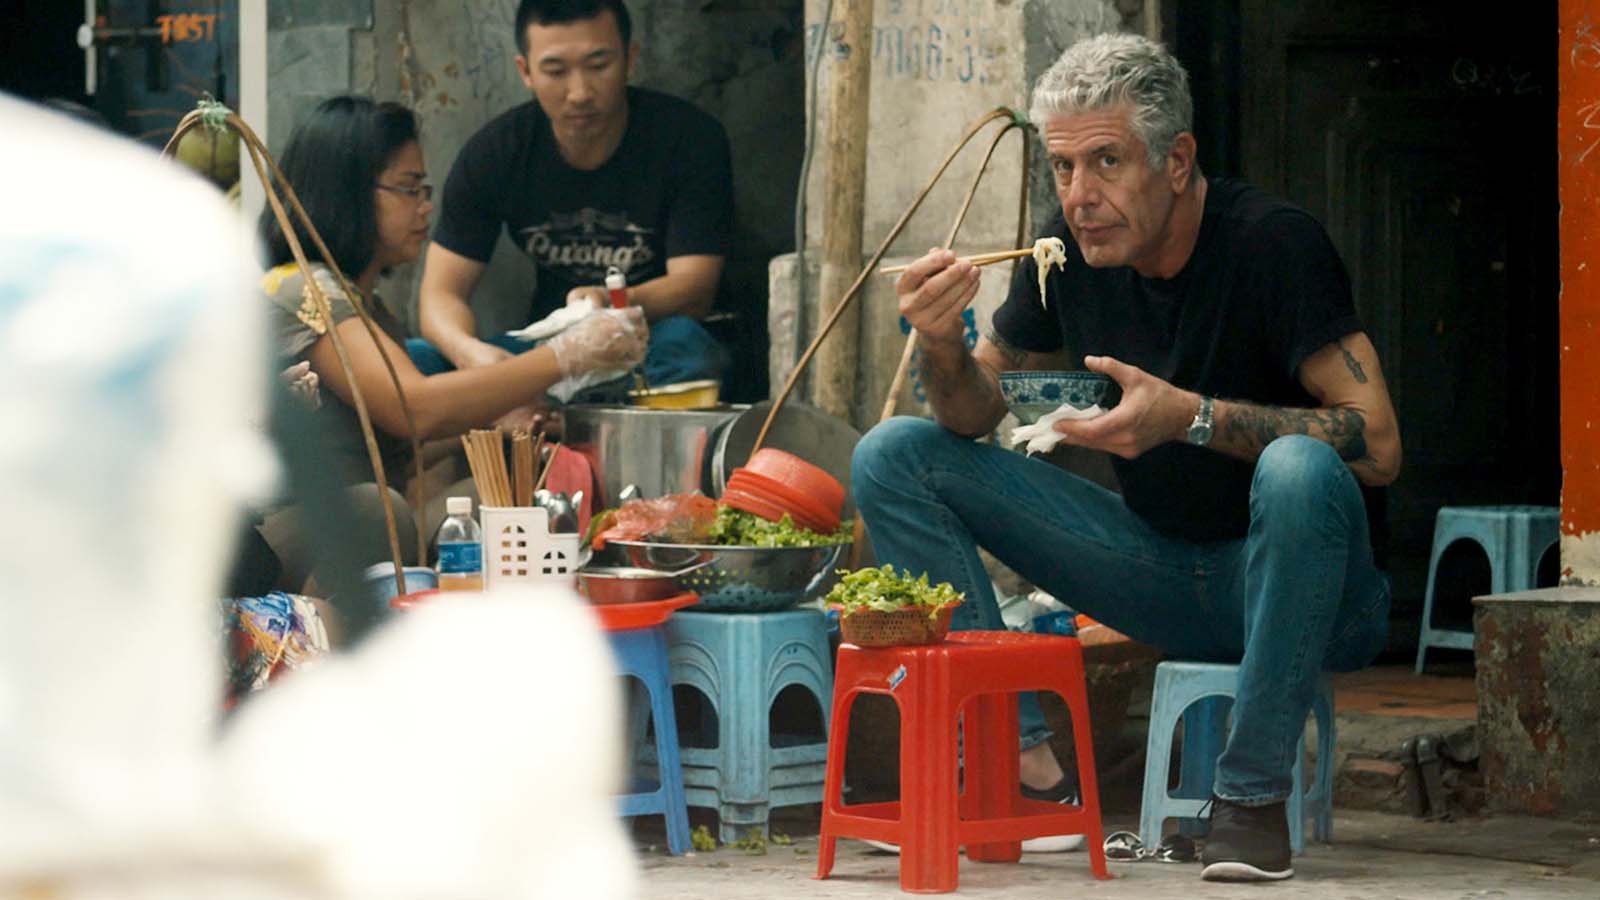 Anthony Bourdain eats street noodles in a scene from Roadrunner. Image © Focus Features